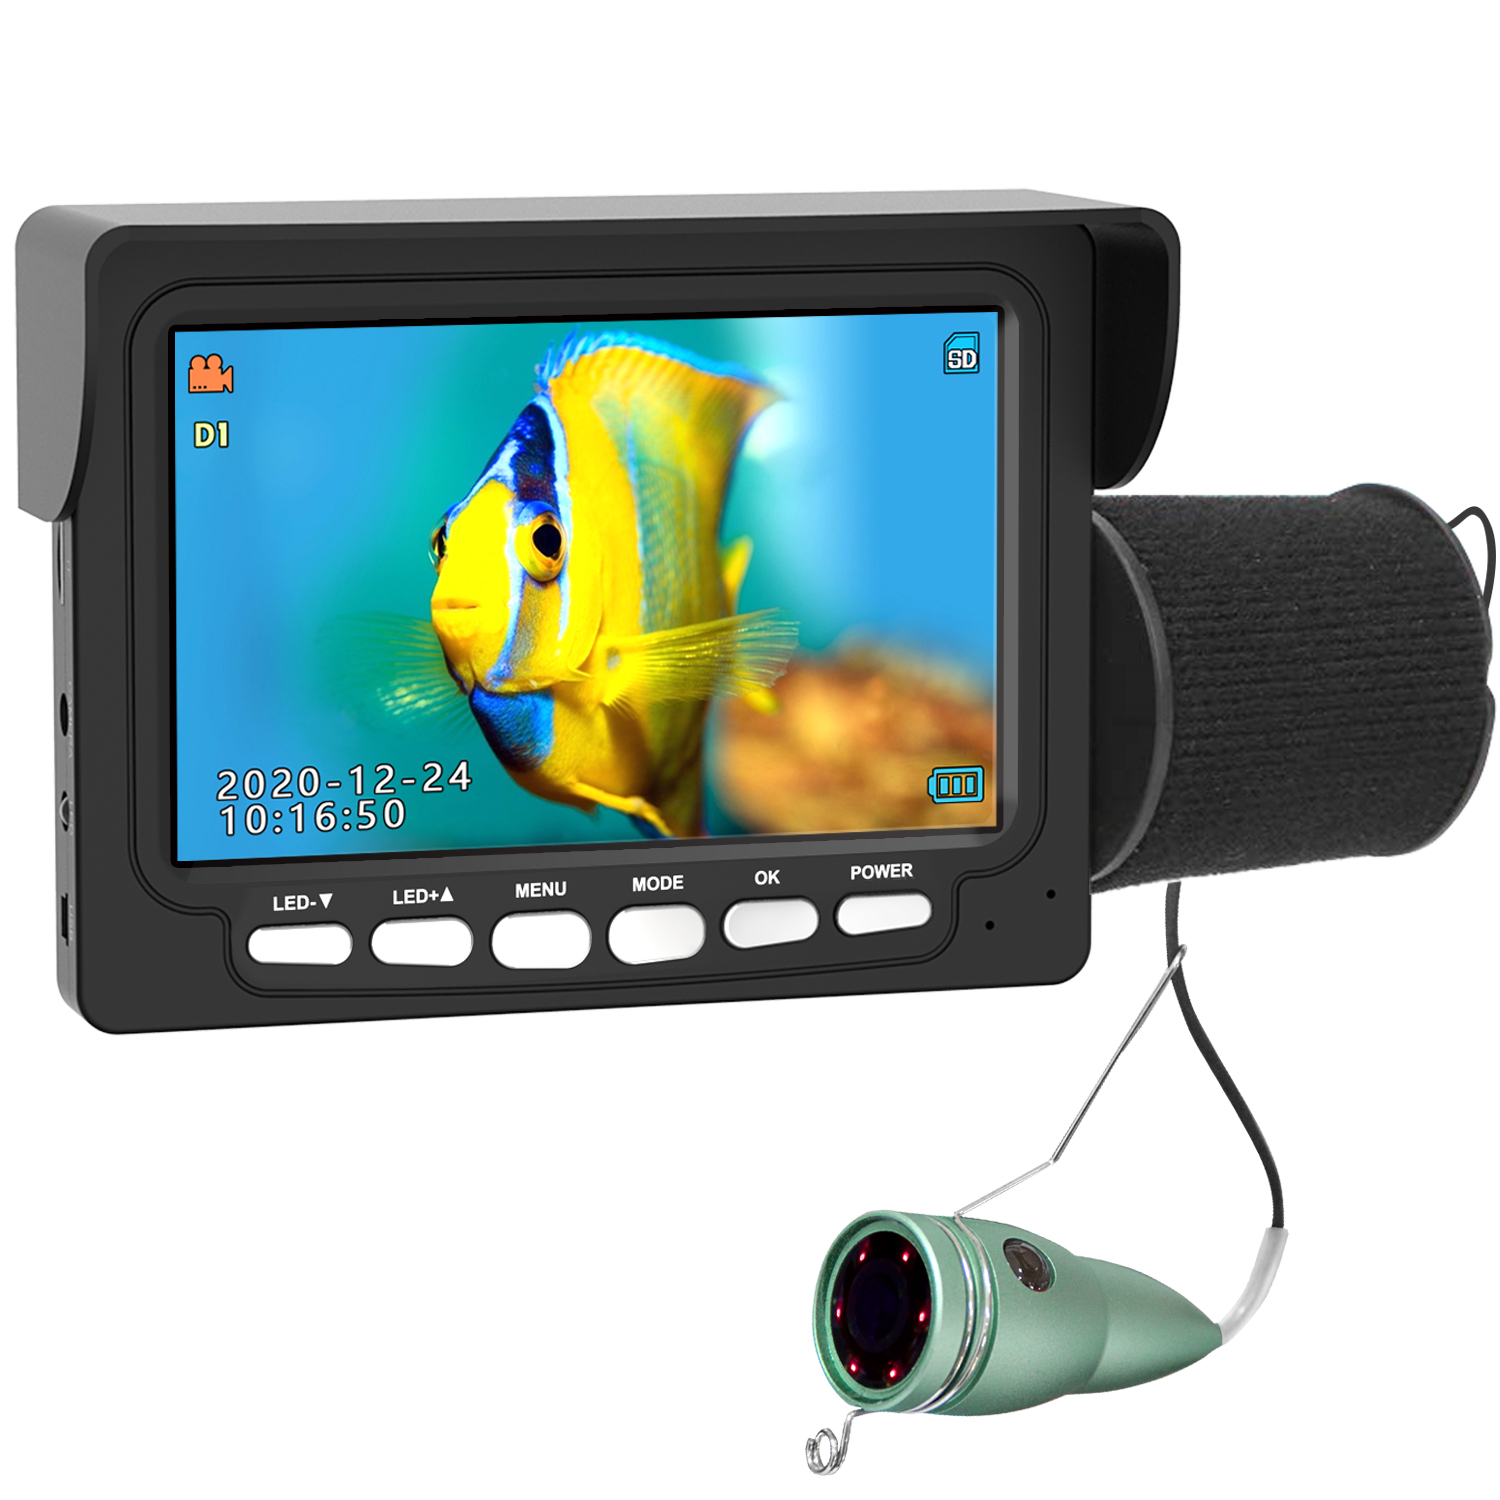 UK ASHATA 360° Rotation Underwater Fishing Camera Fish Finder System Kit with 9 Inch Monitor 8GB TF Card 700TVL Video Camera 50M Cable 38 LED Light for Ice,Lake and Boat Fishing 